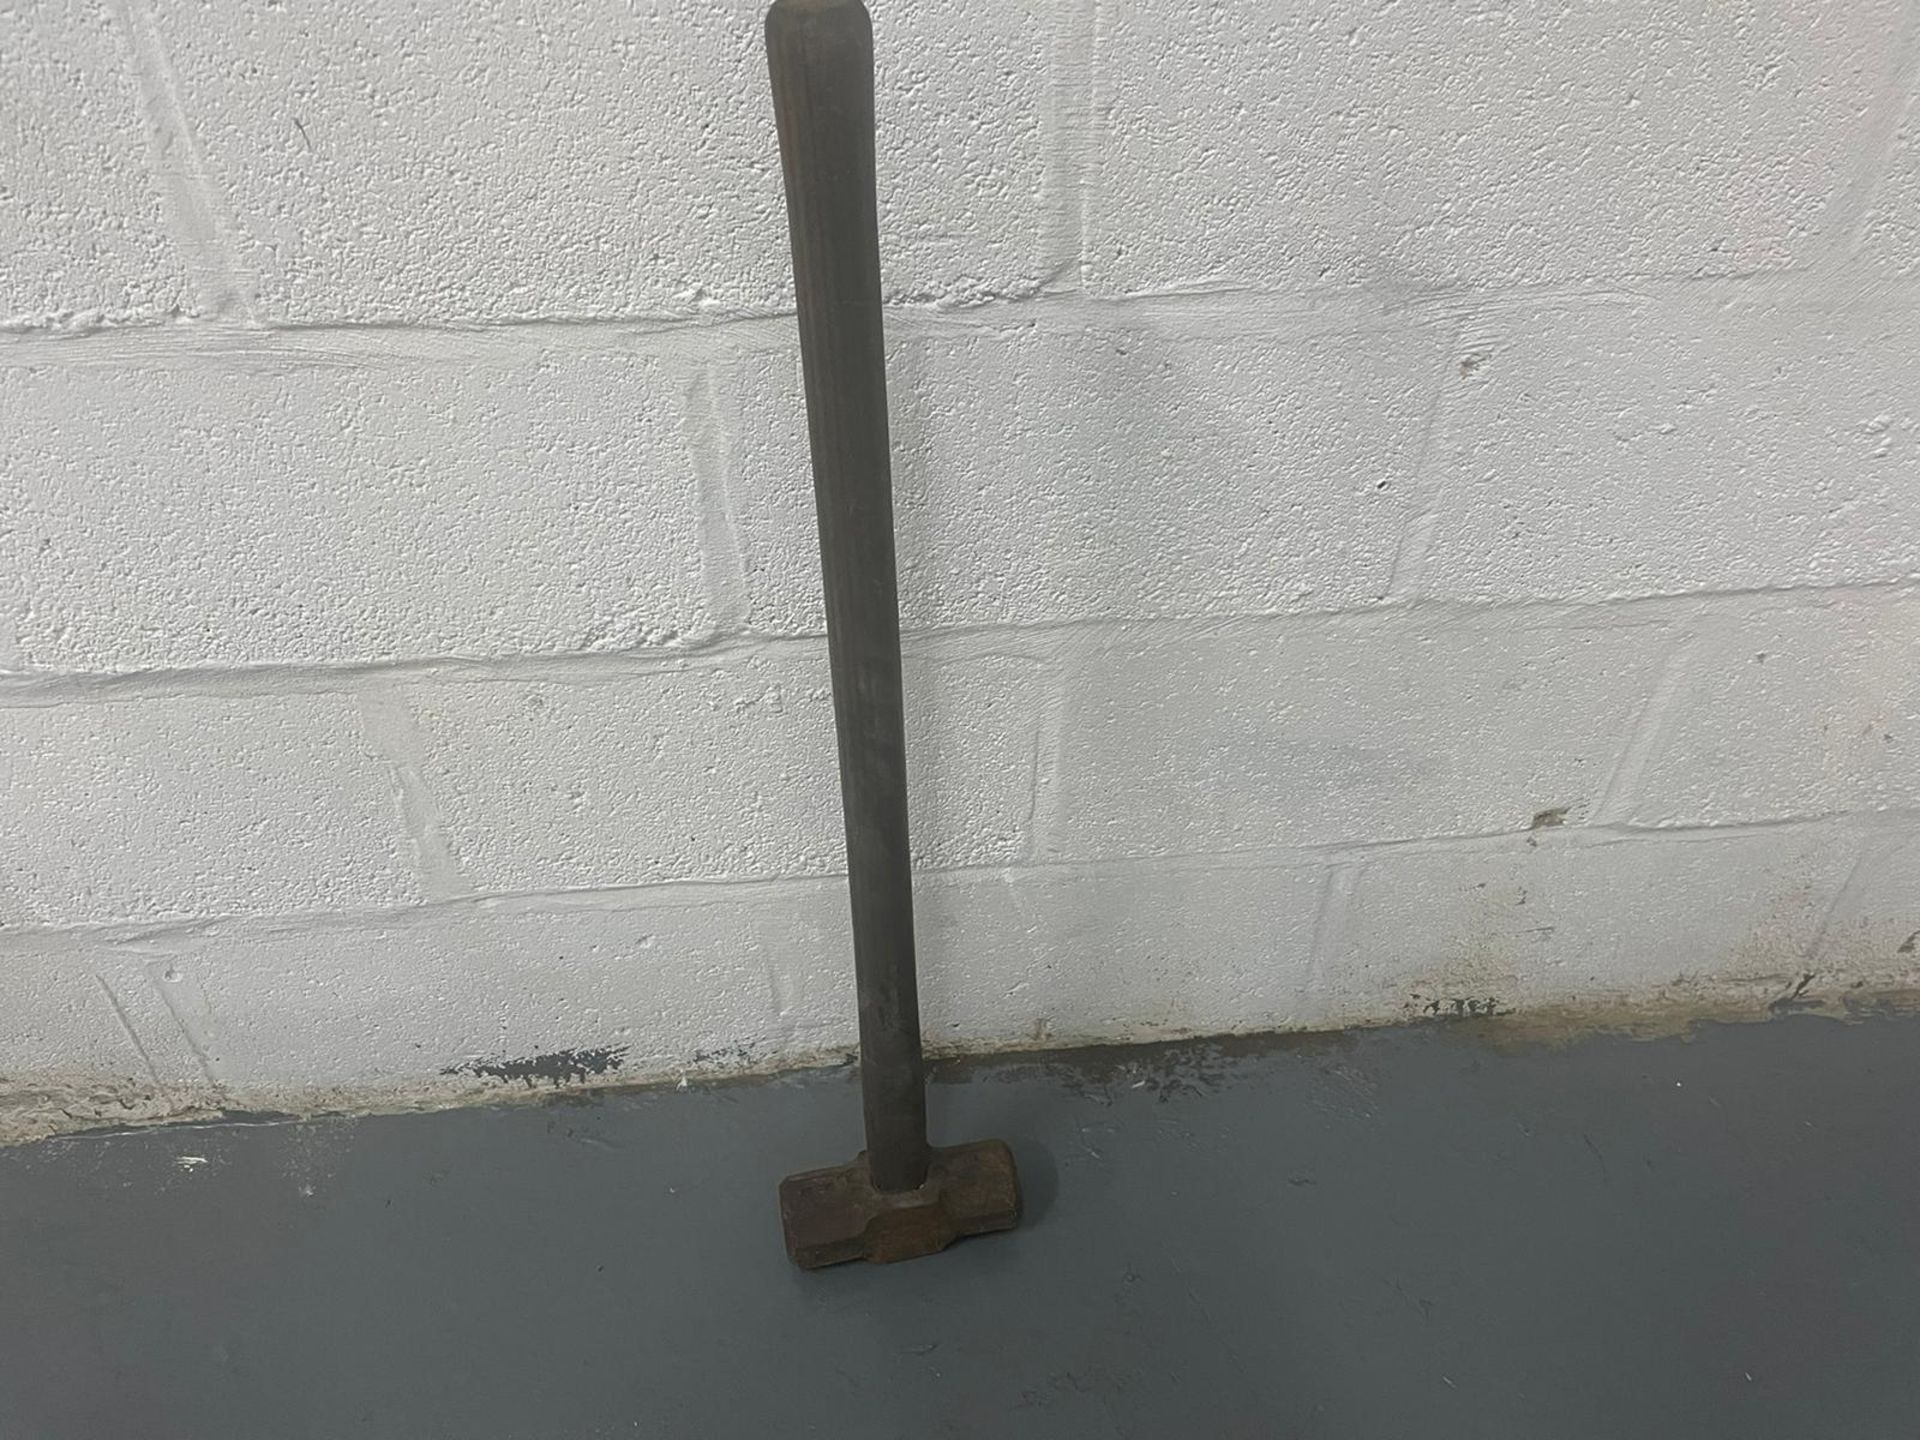 1 x Sledgehammer/Mallet - CL011- Location: Corby, Northamptonshire